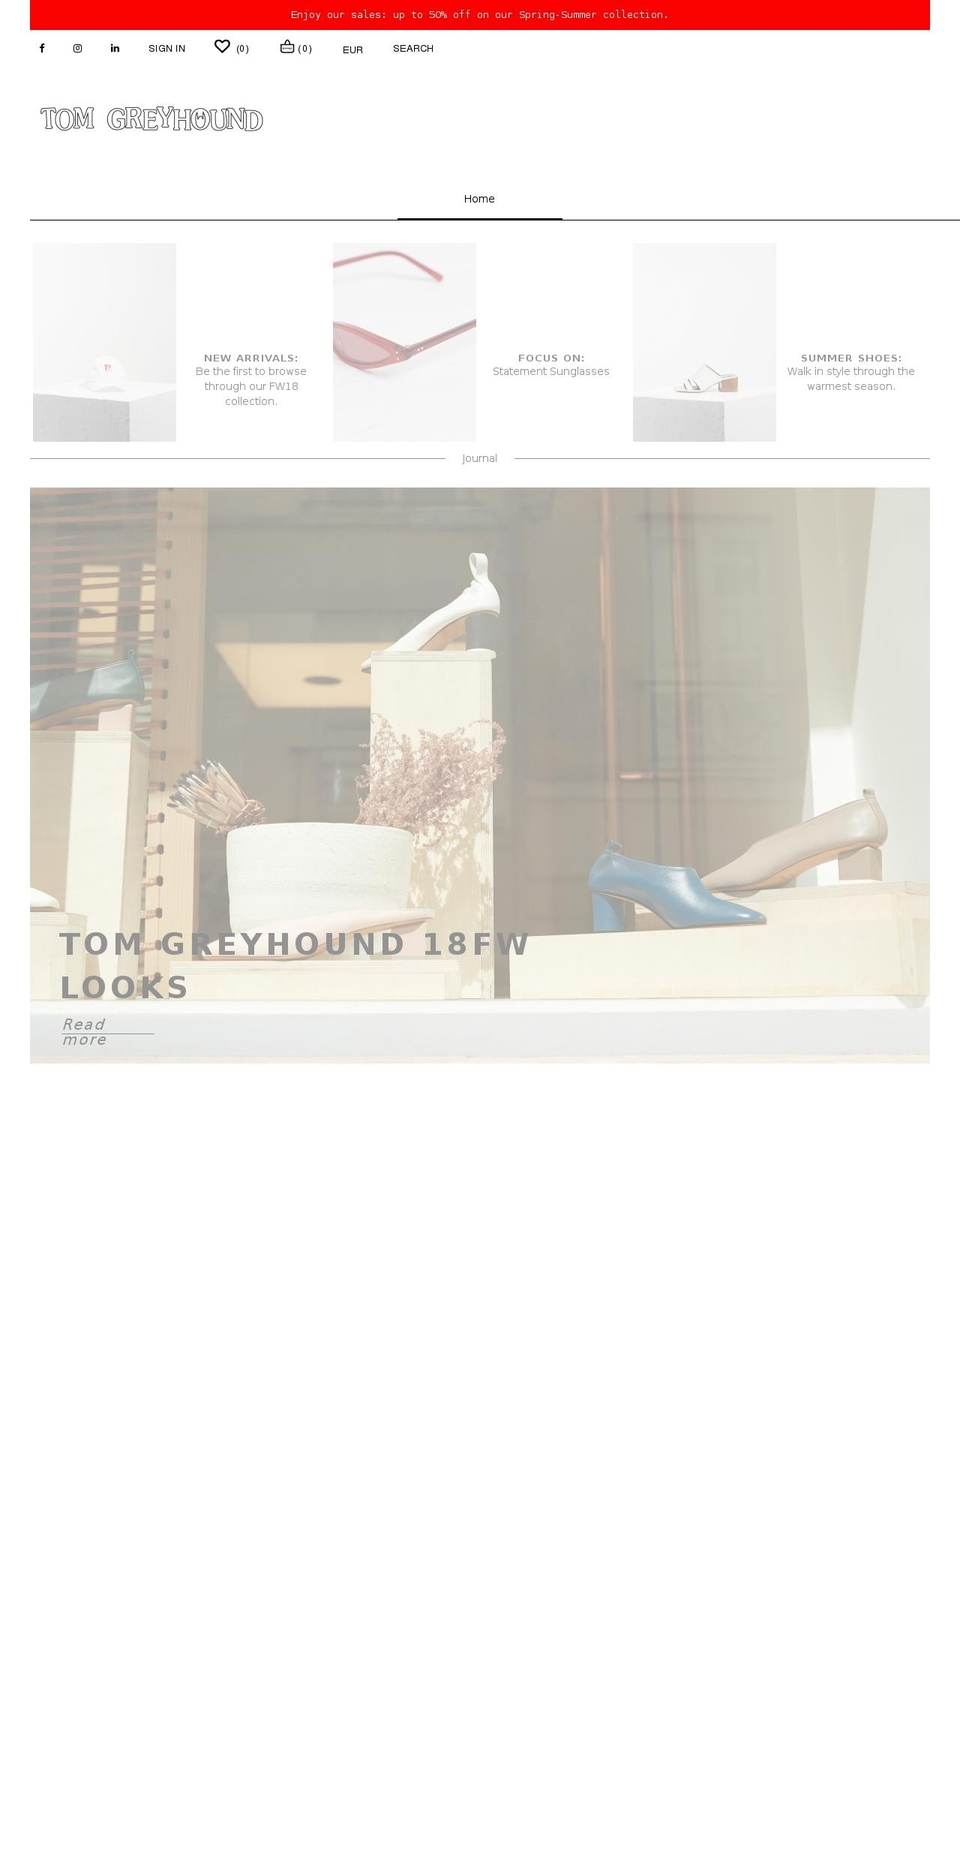 Current Shopify theme site example tomgreyhound.fr